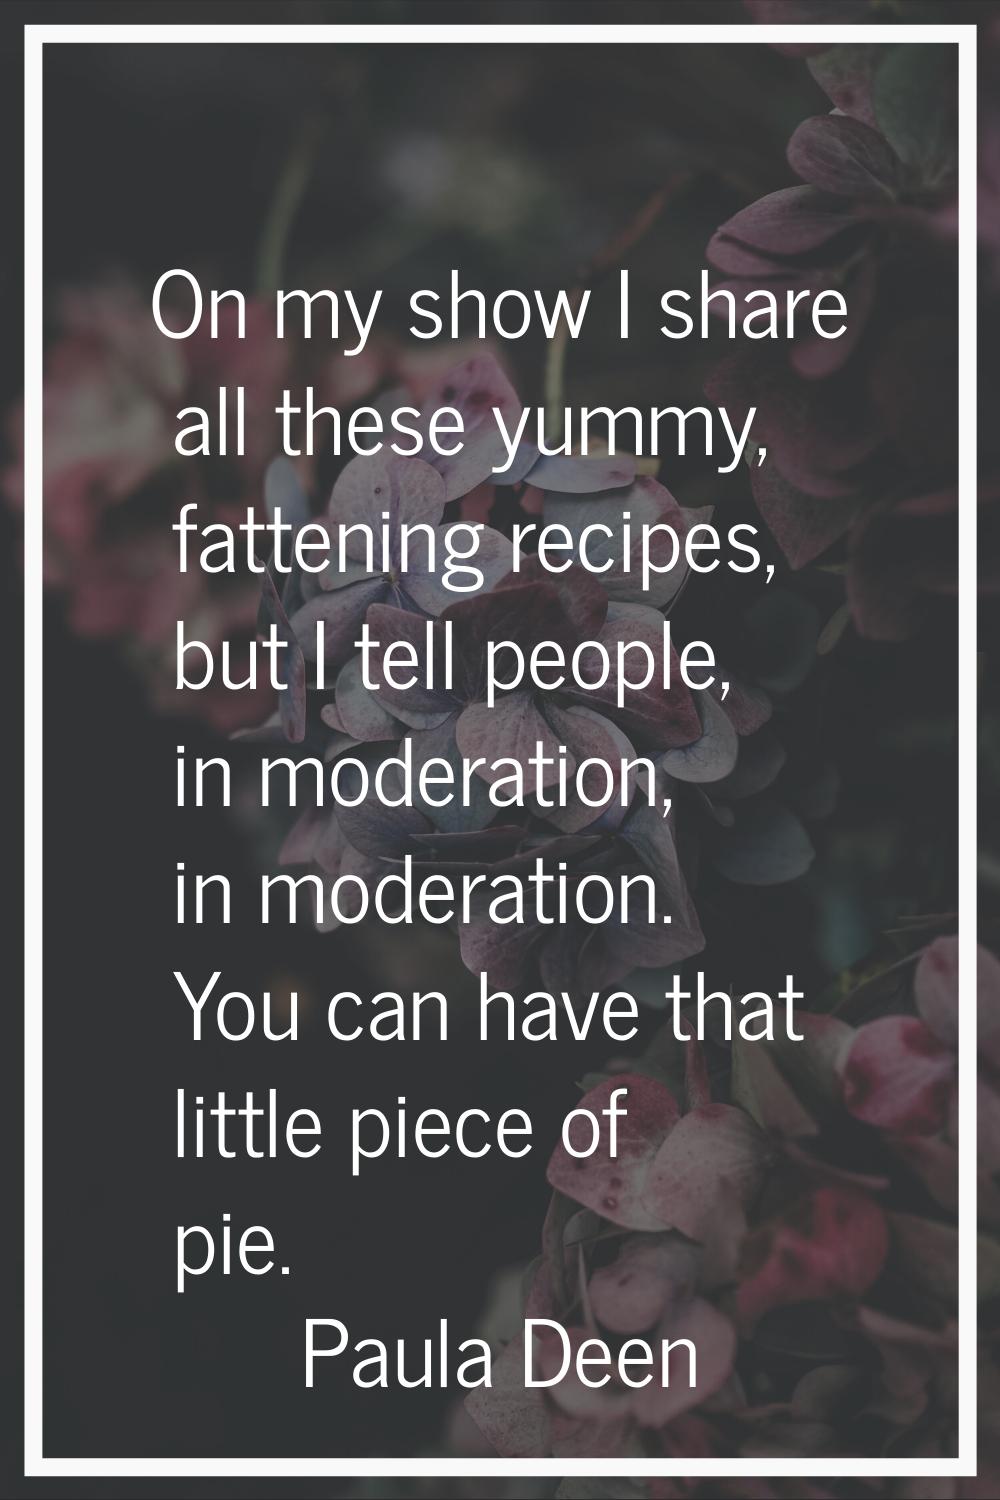 On my show I share all these yummy, fattening recipes, but I tell people, in moderation, in moderat